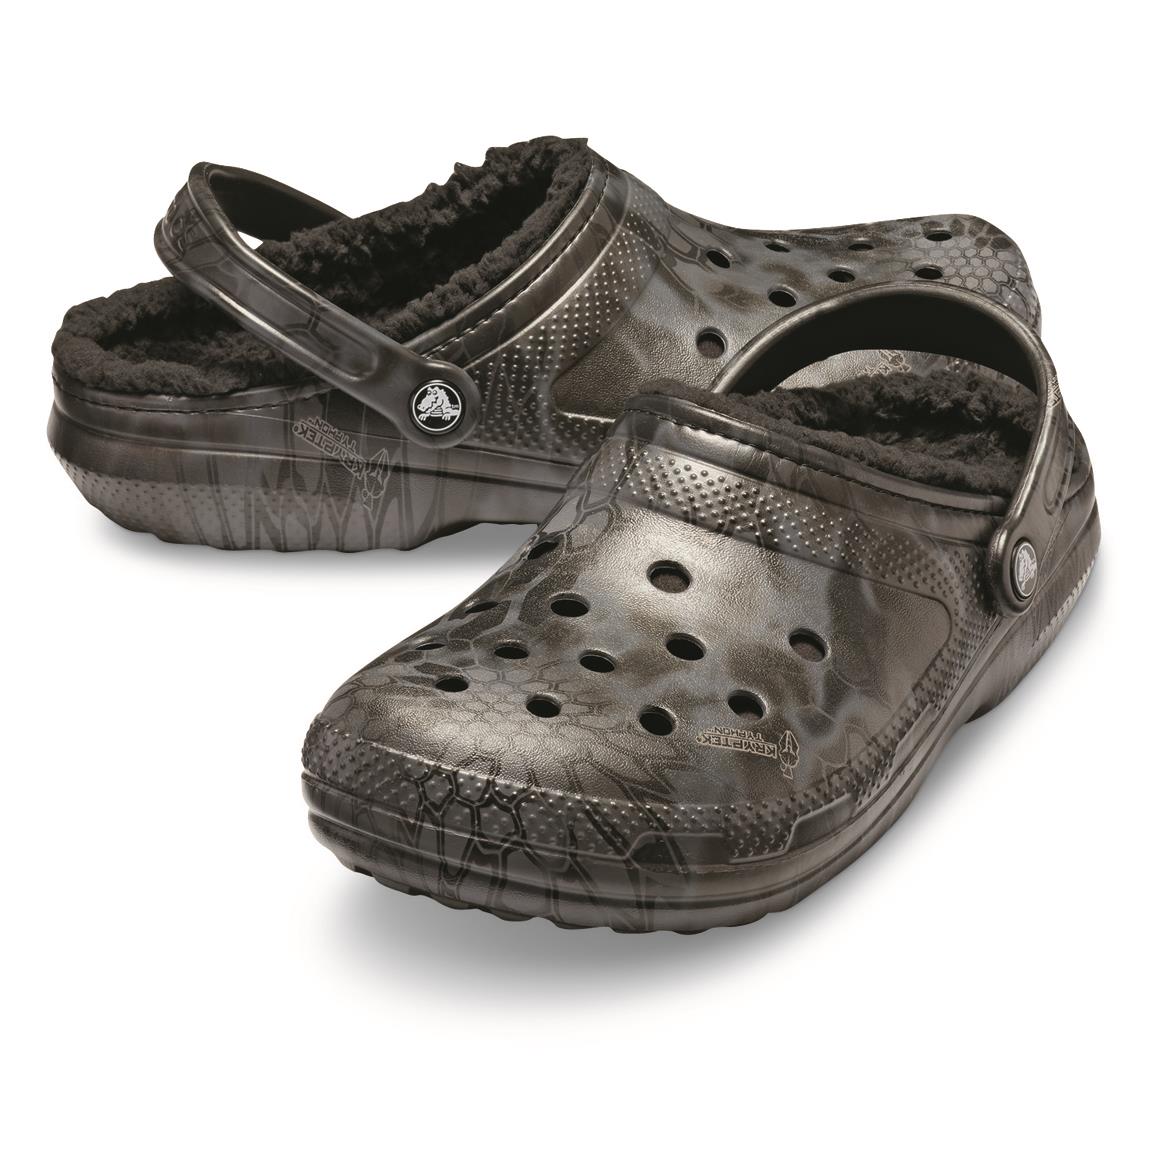 camouflage lined crocs